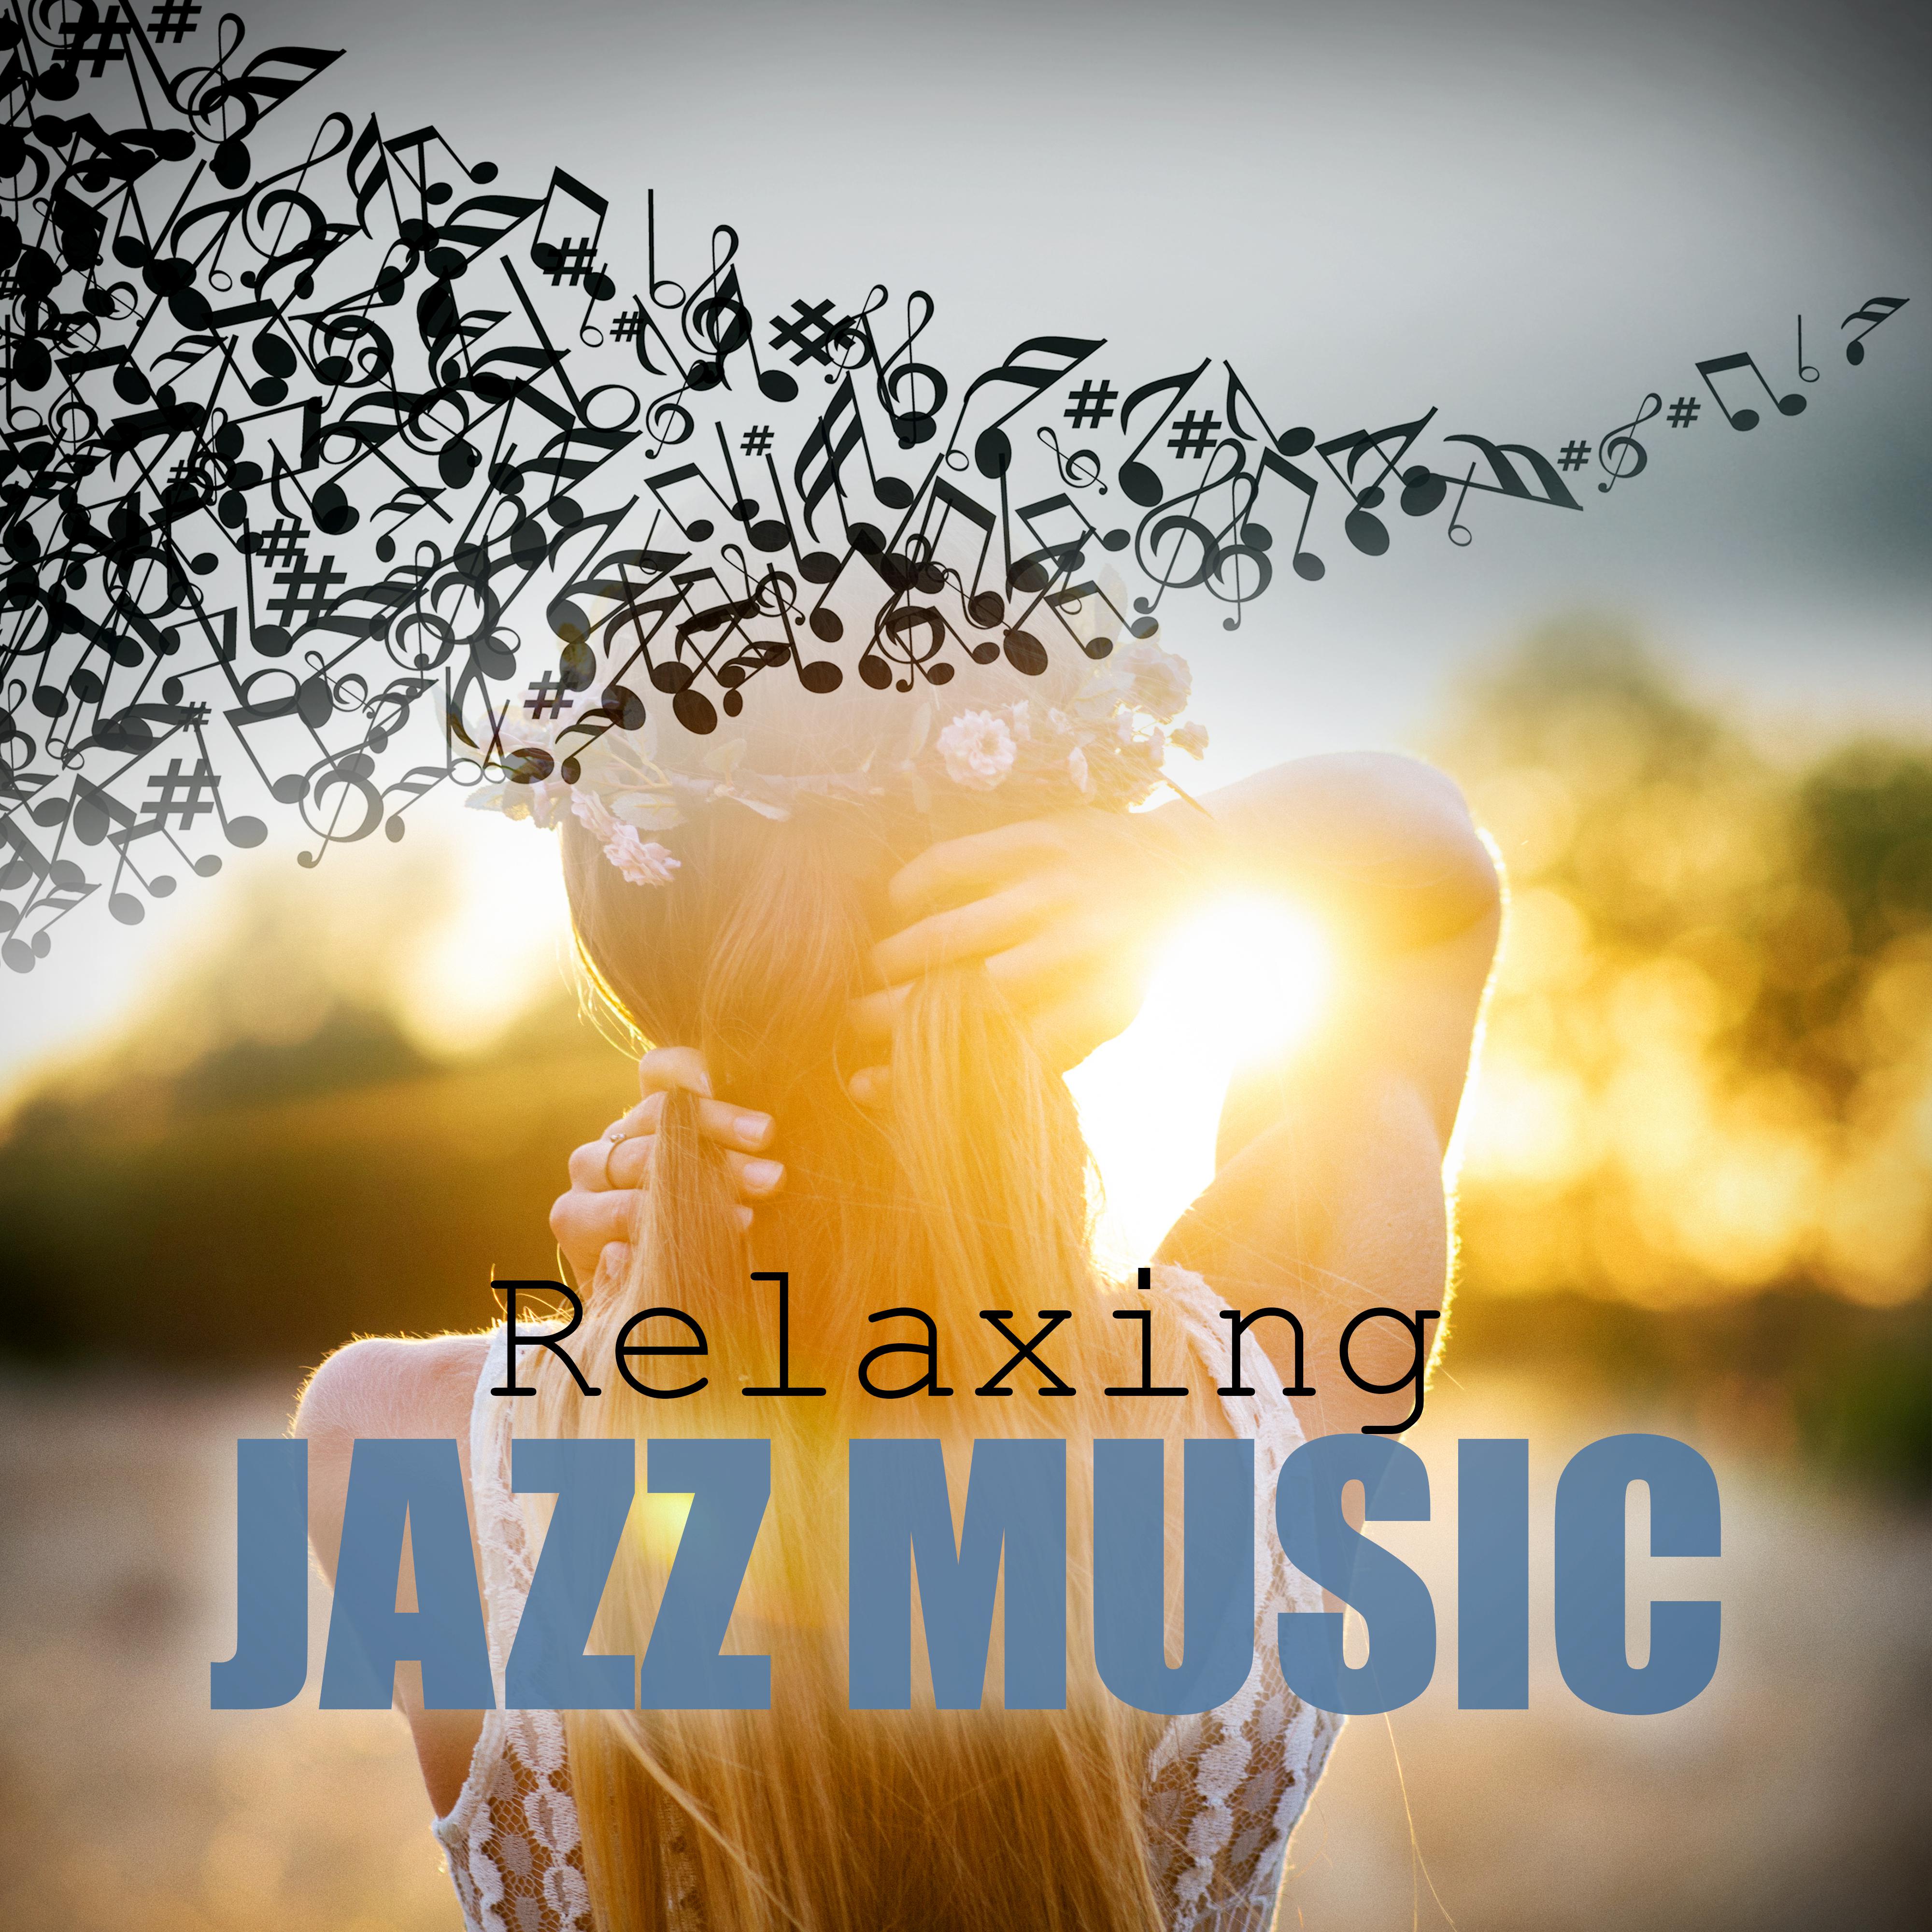 Relaxing Jazz Music - Soft Background Music, Smooth Music, Mood Music, Cafe Lounge, Cafe Jazz, Cool Jazz, Cool Music, Instrumental Piano & Acoustic Guitar Jazz